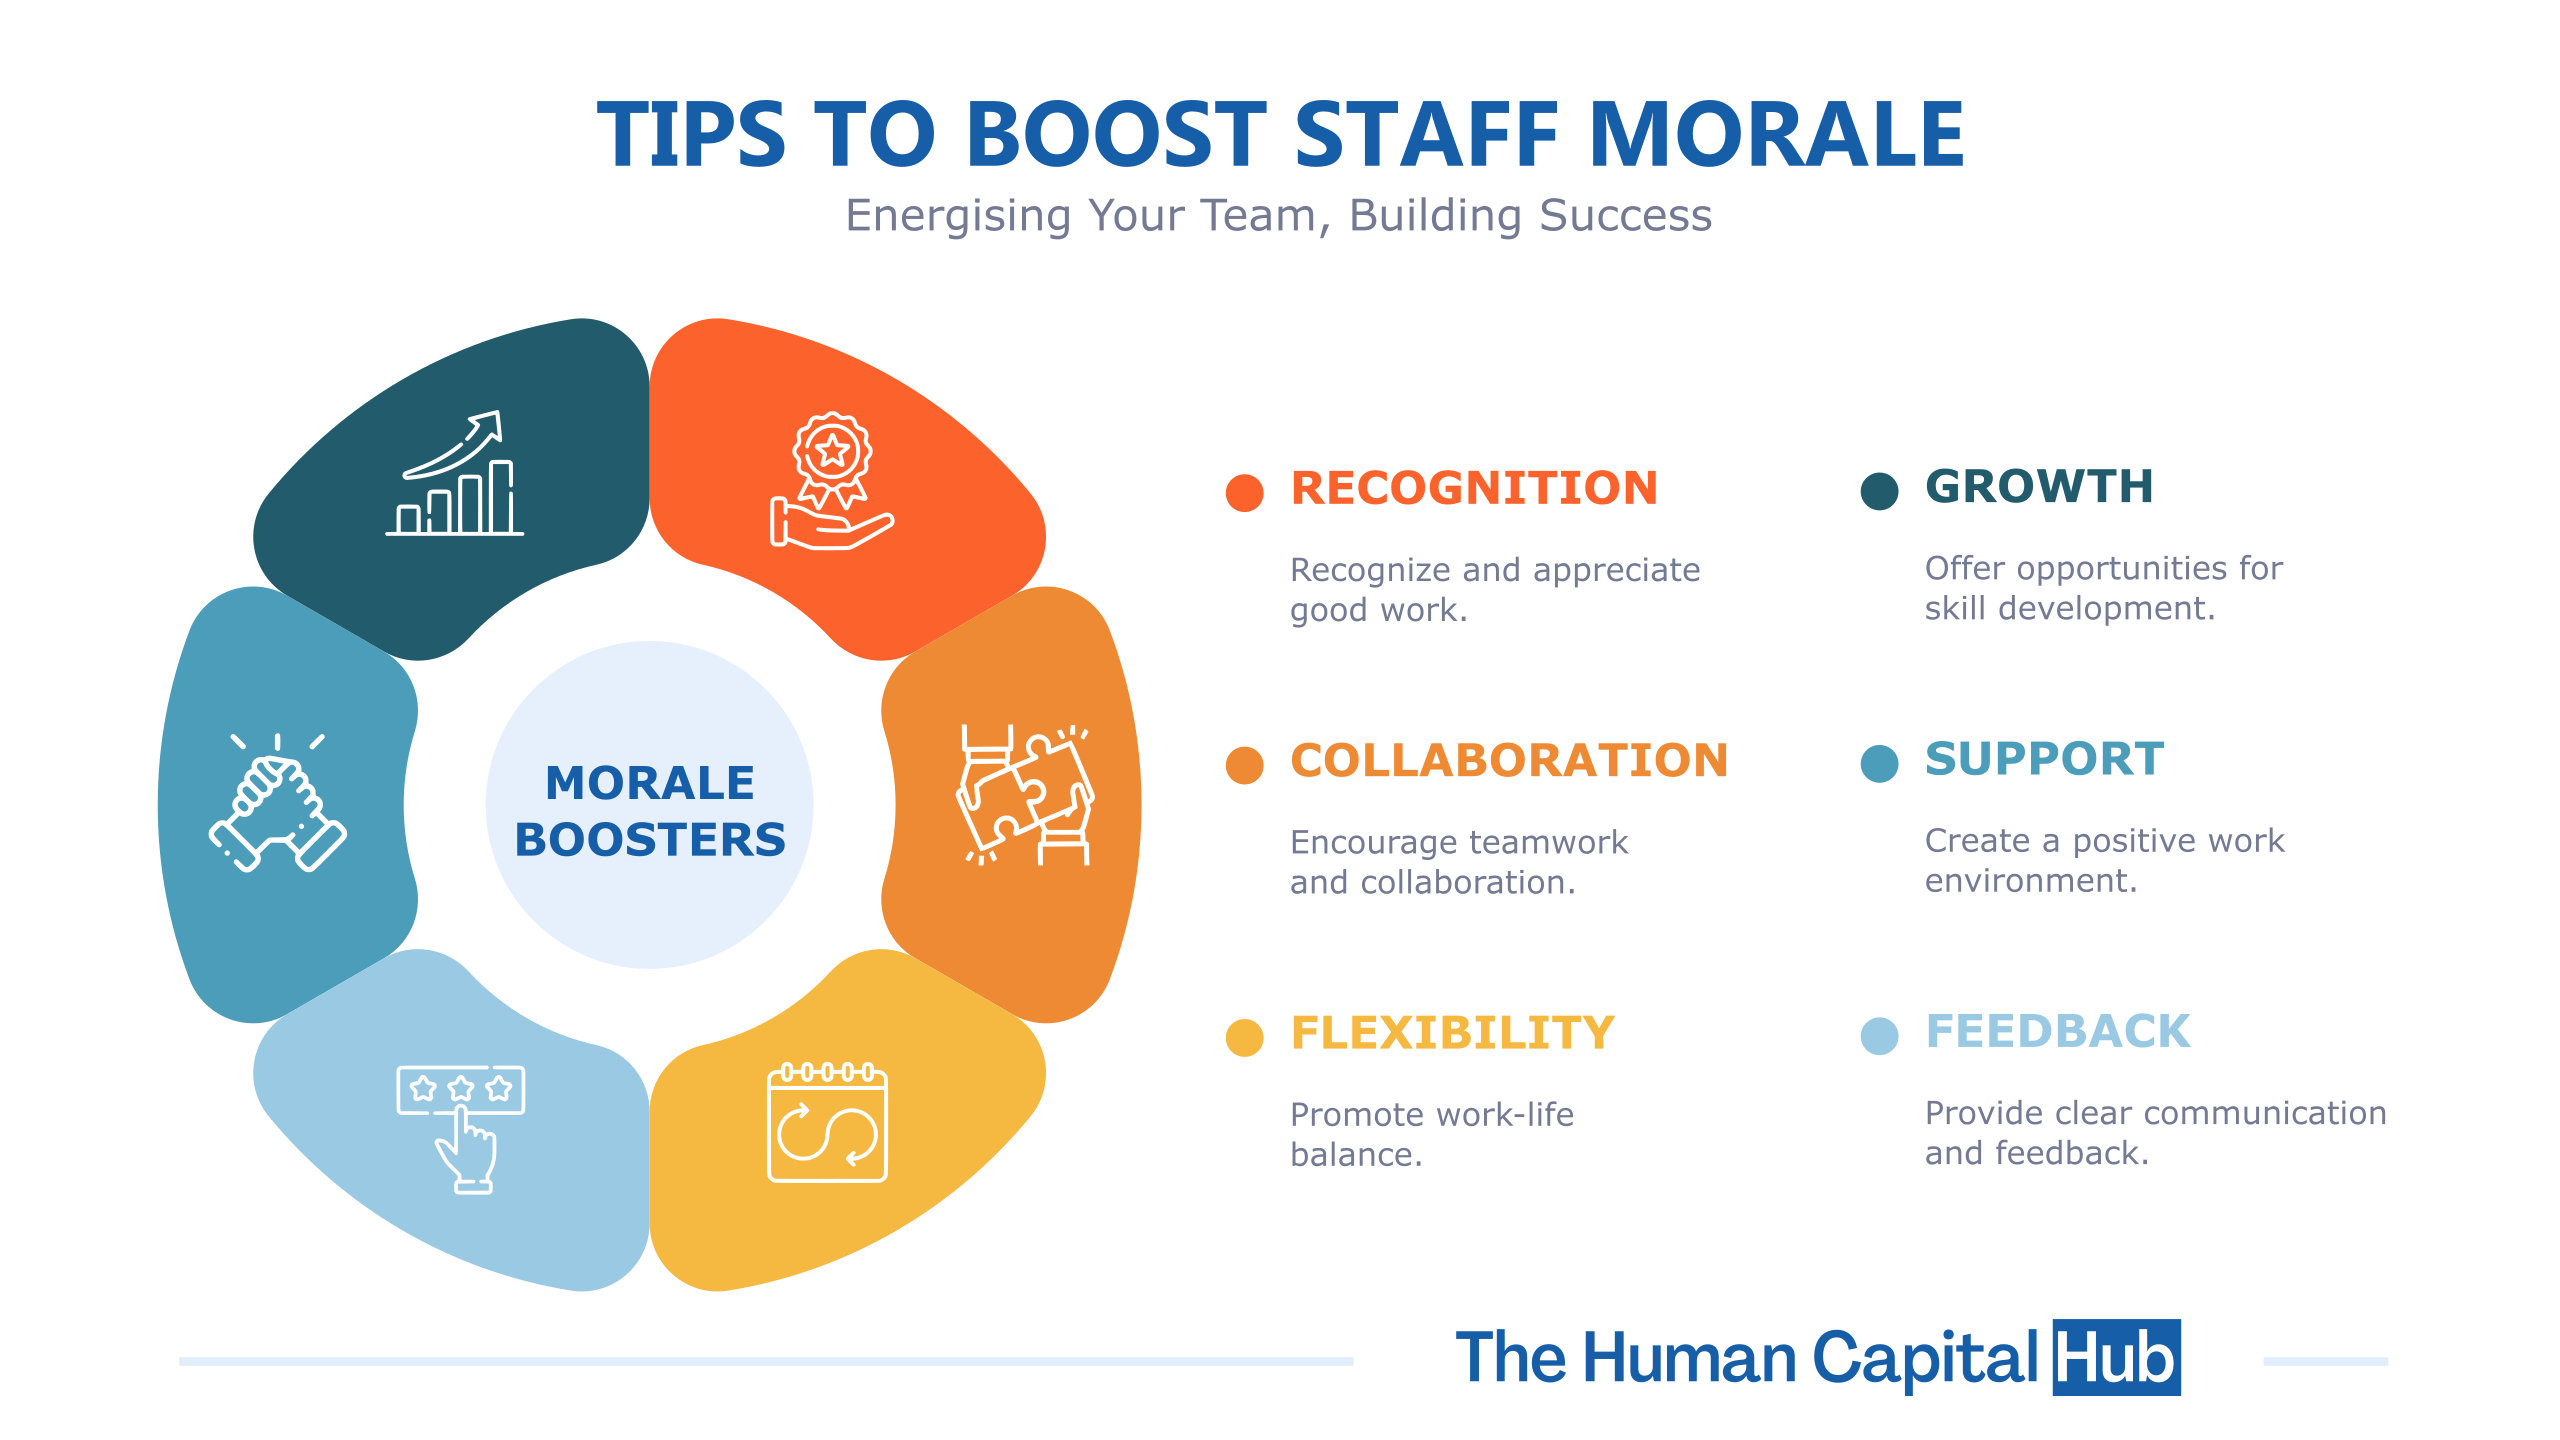 Staff Morale Booster: What You Need To Know